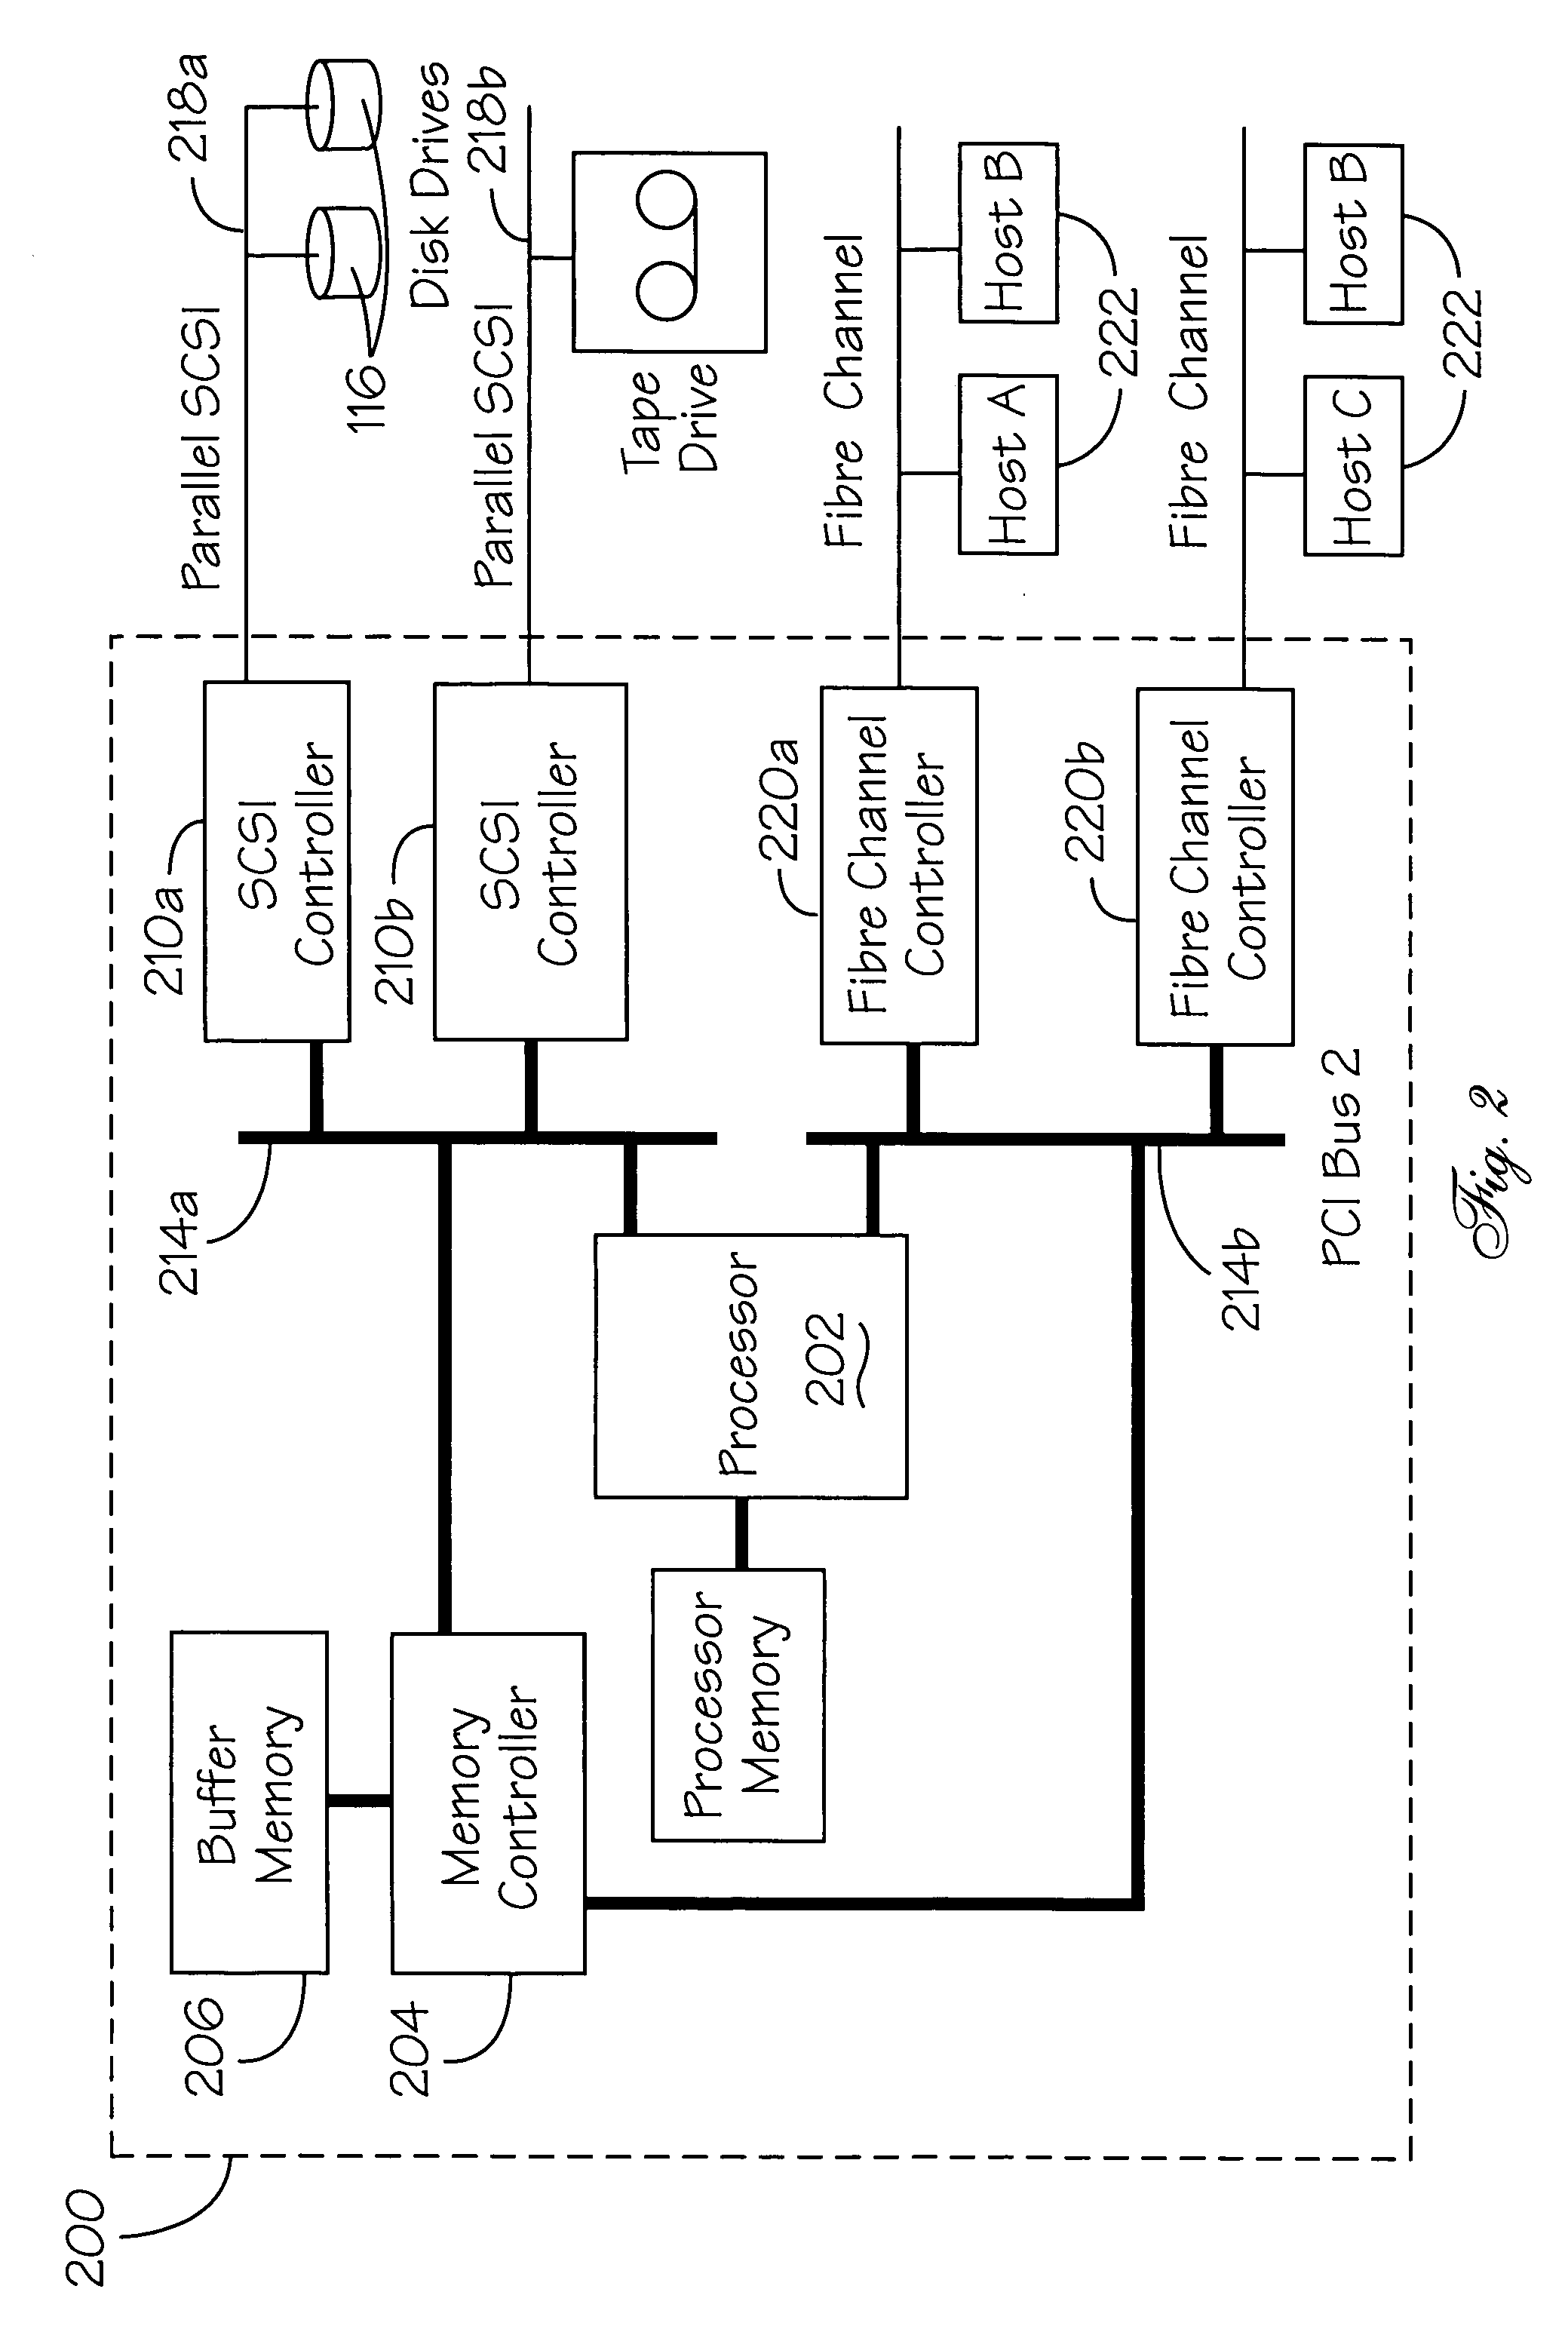 Method for verifying functional integrity of computer hardware, particularly data storage devices